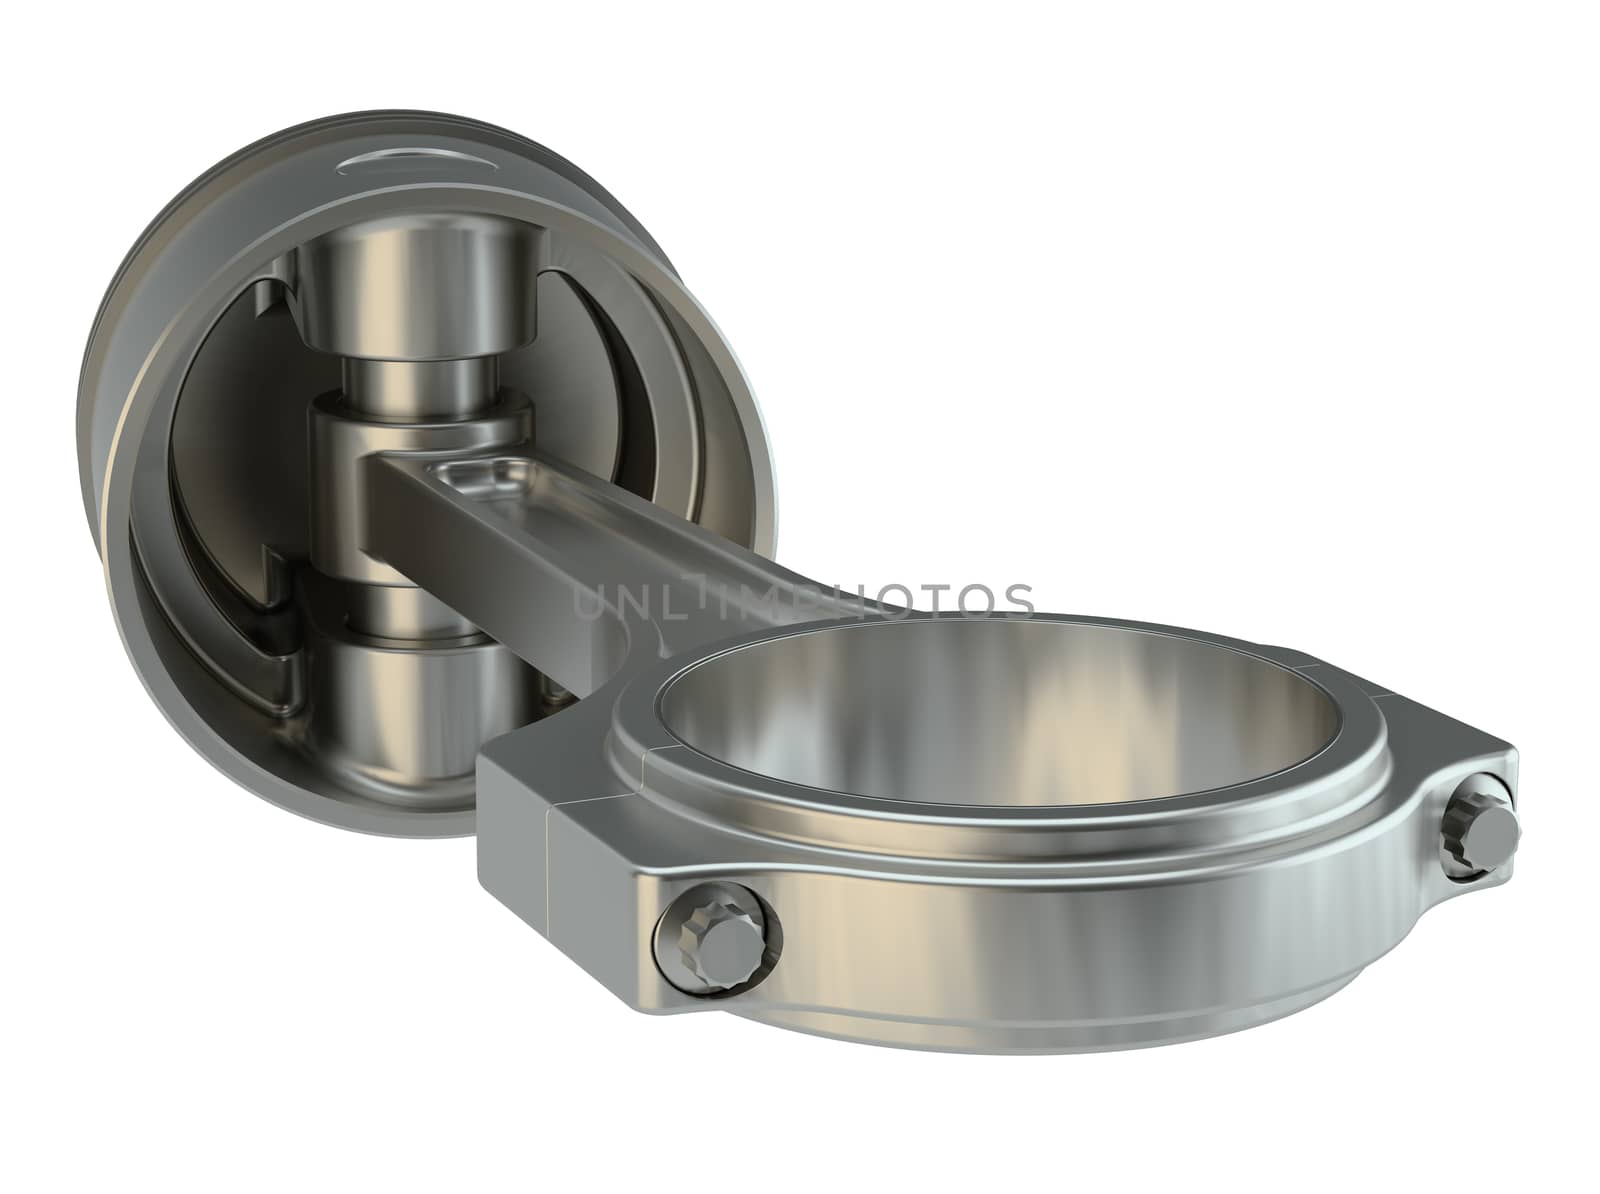 Piston with connecting rod by cherezoff